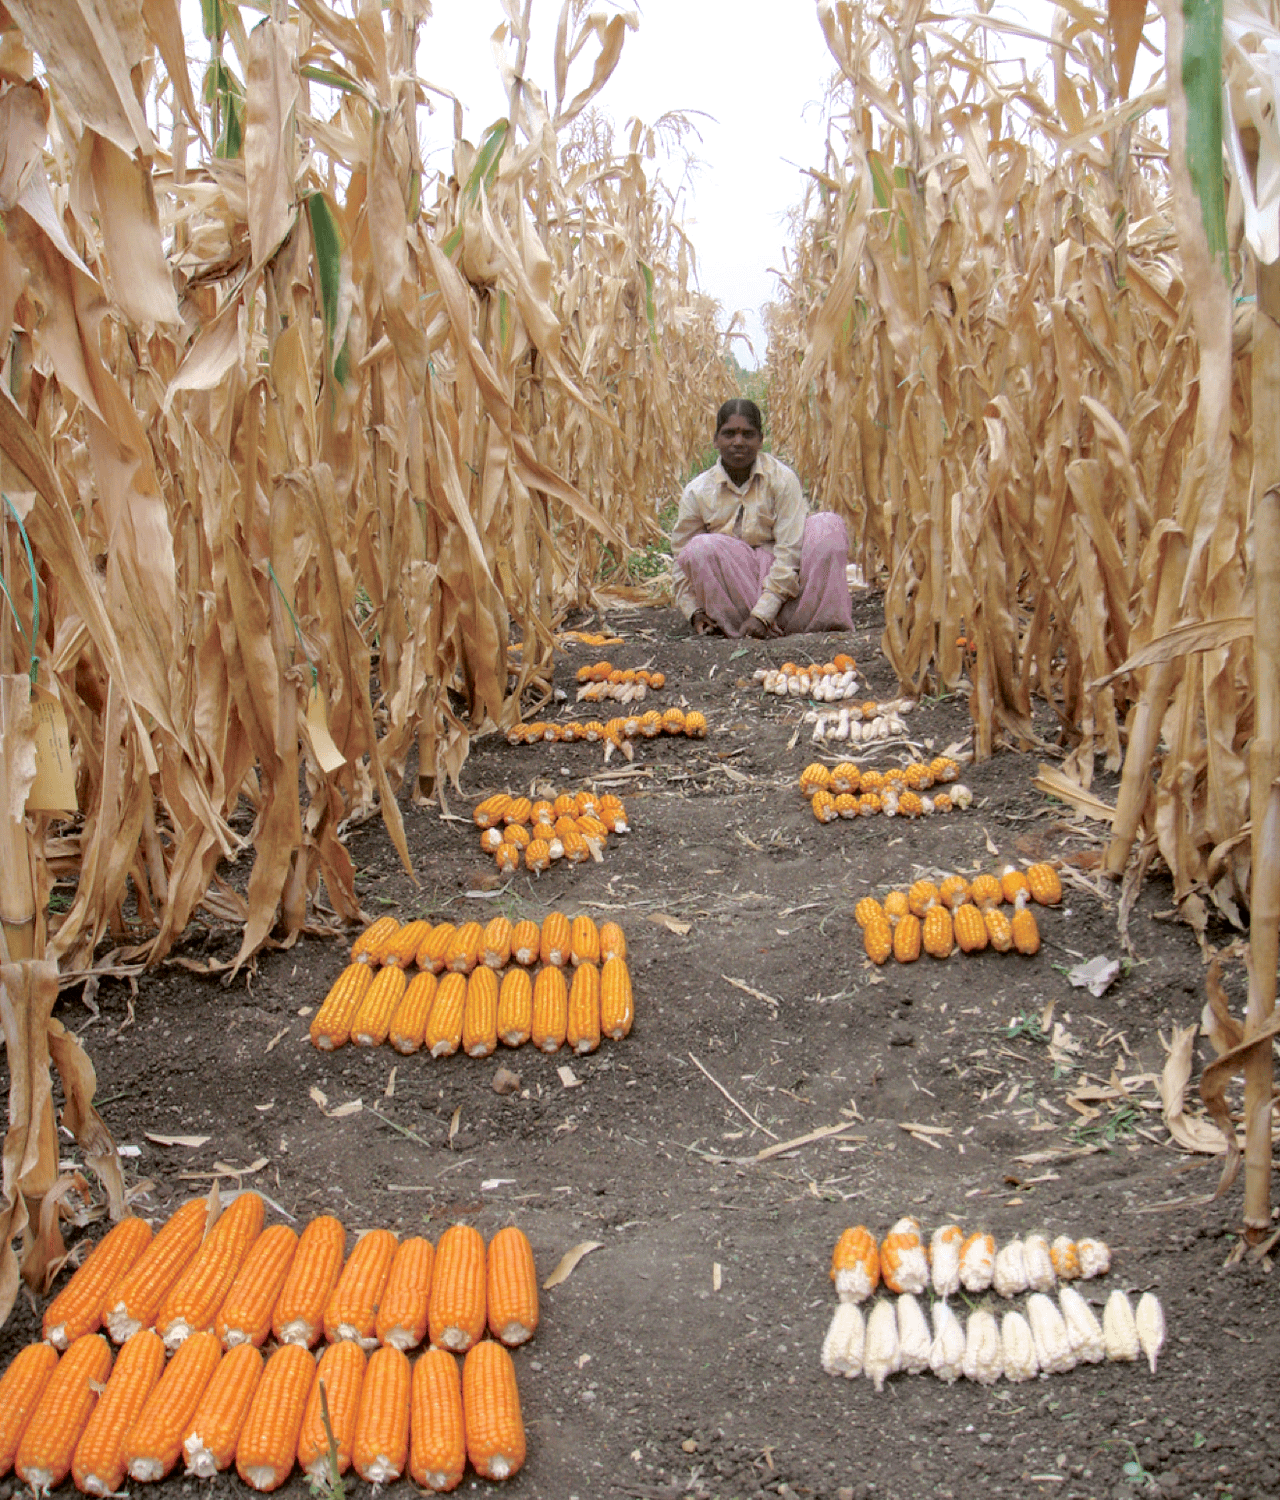 Variability among maize genotypes for agronomic and yield traits under managed drought stress. (Photo: CIMMYT)